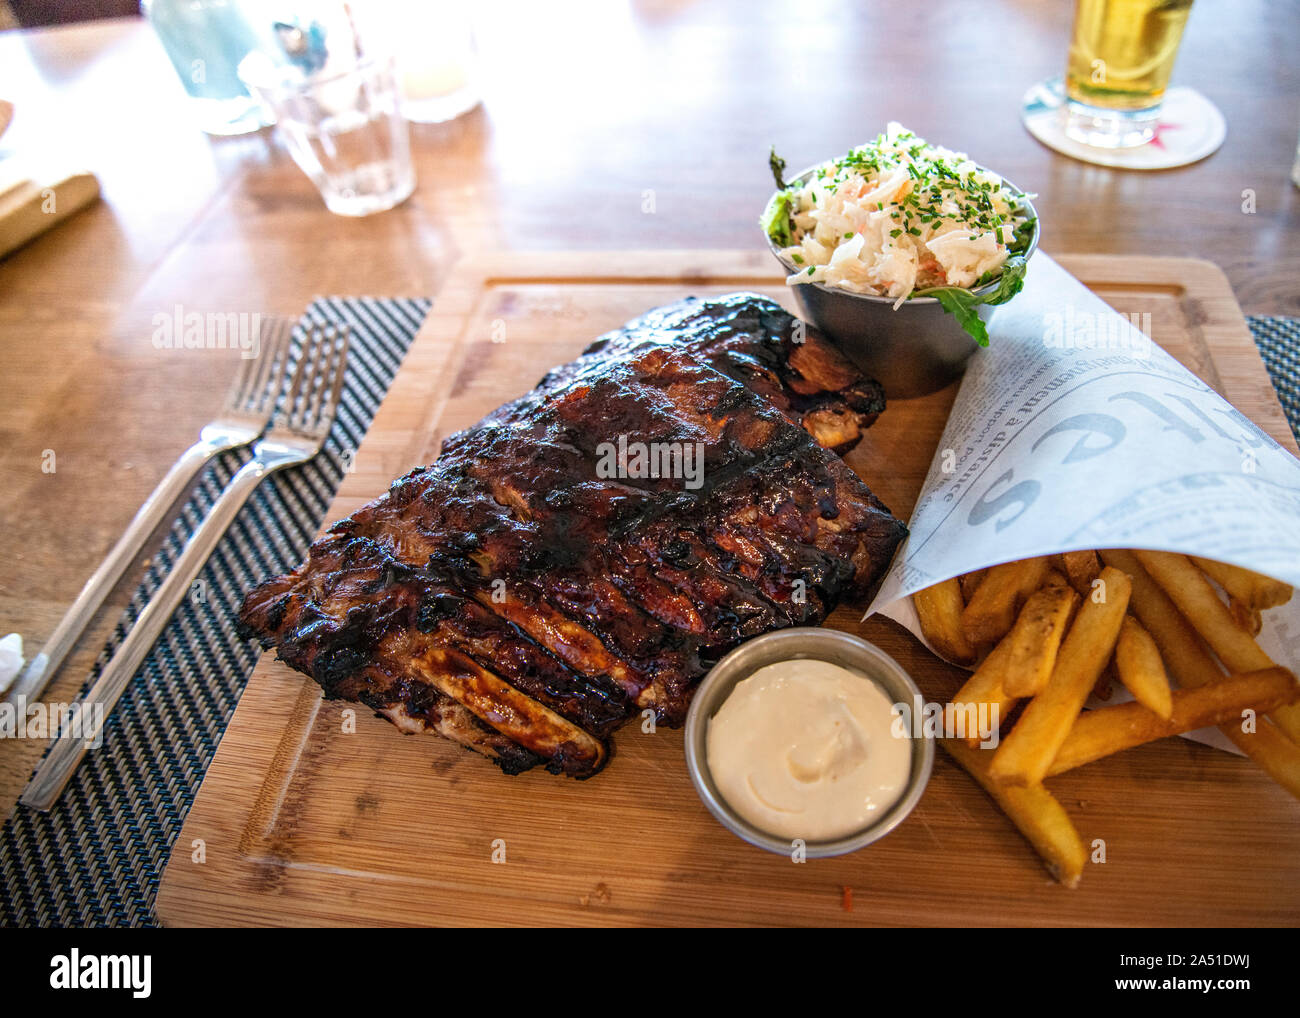 traditional rack of tasty mouthwatering bbq pork ribs served on wooden plate with hand cut chips and coleslaw, Stock Photo